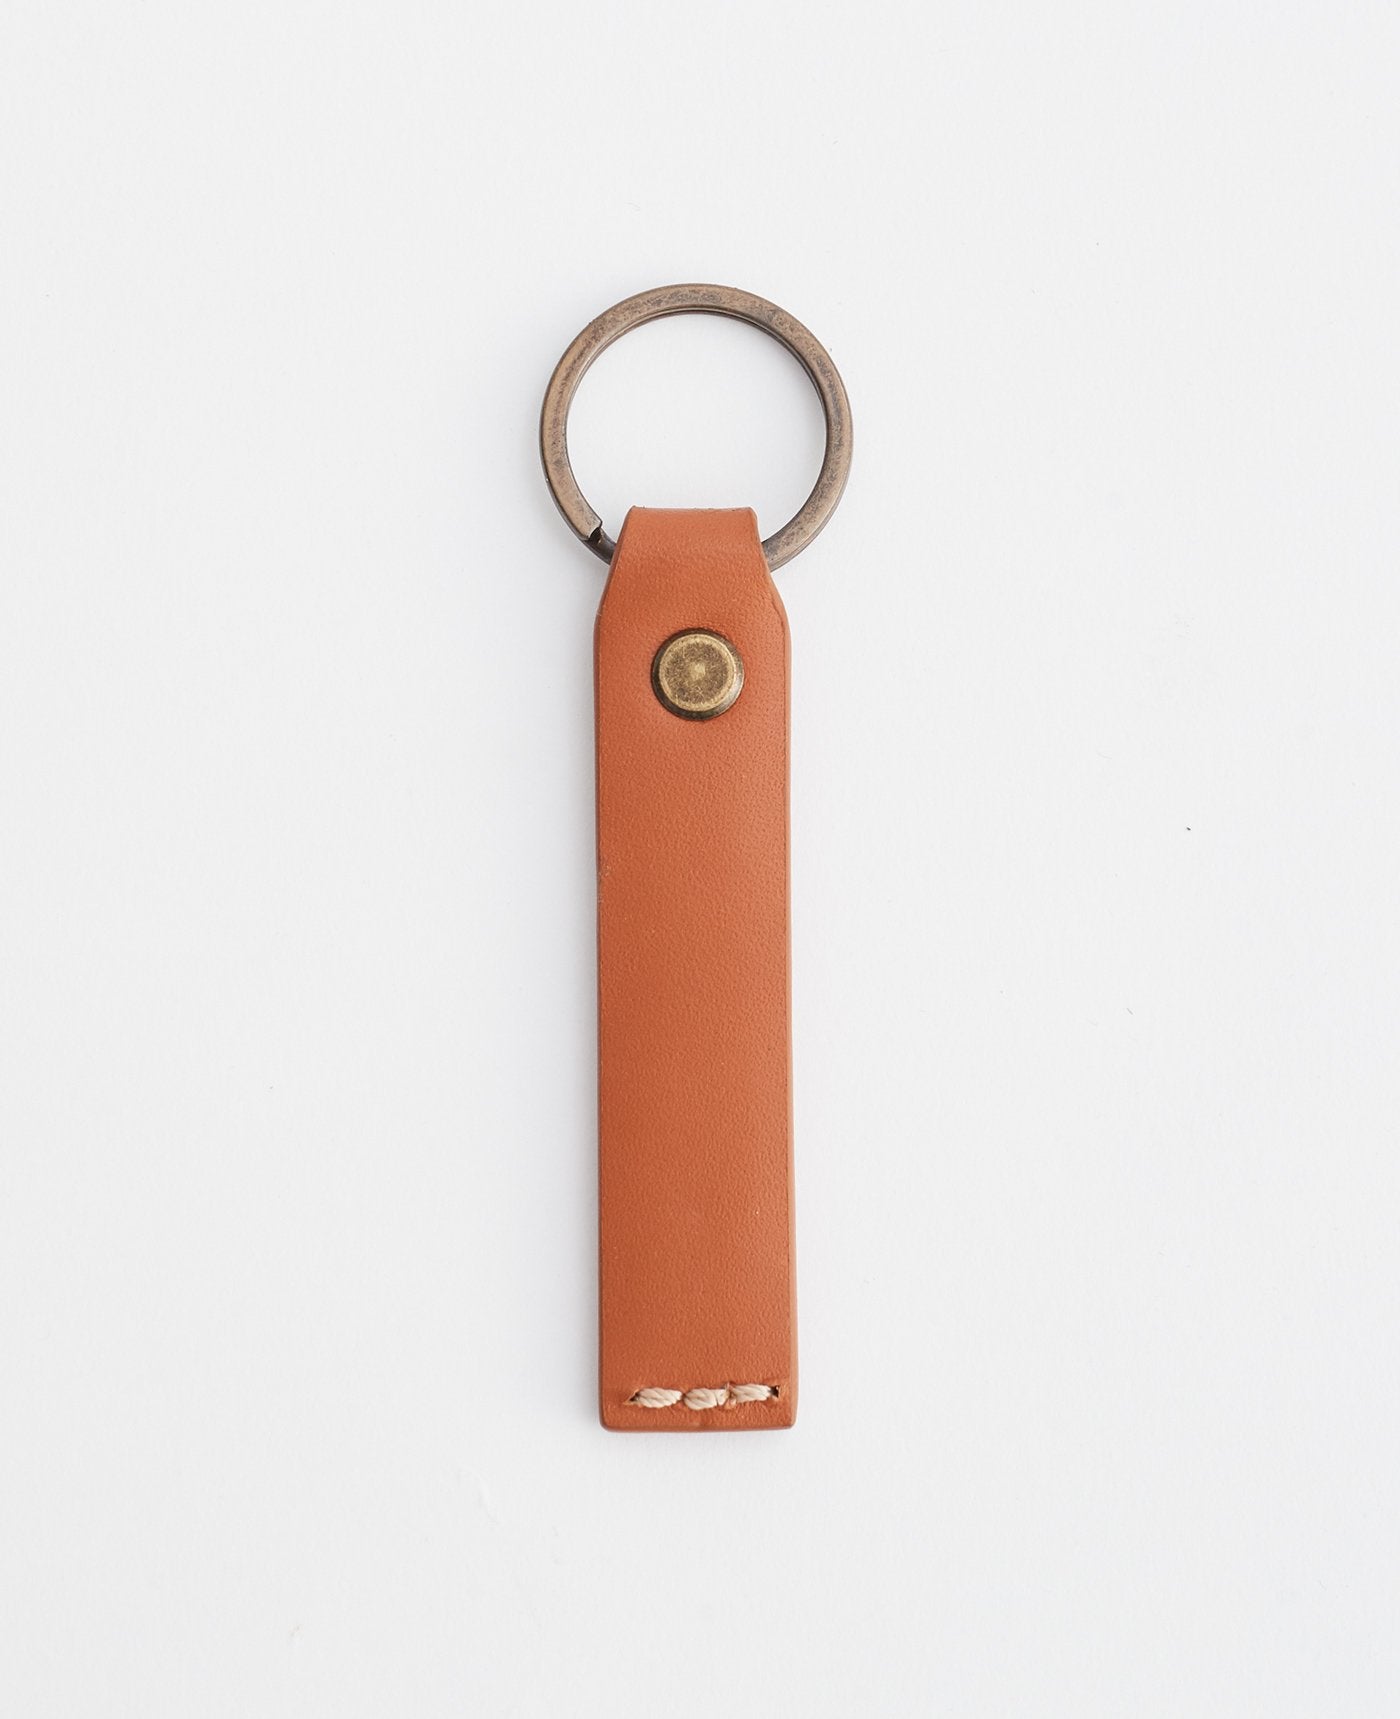 Slimline Tan Leather Key Ring by The Horse